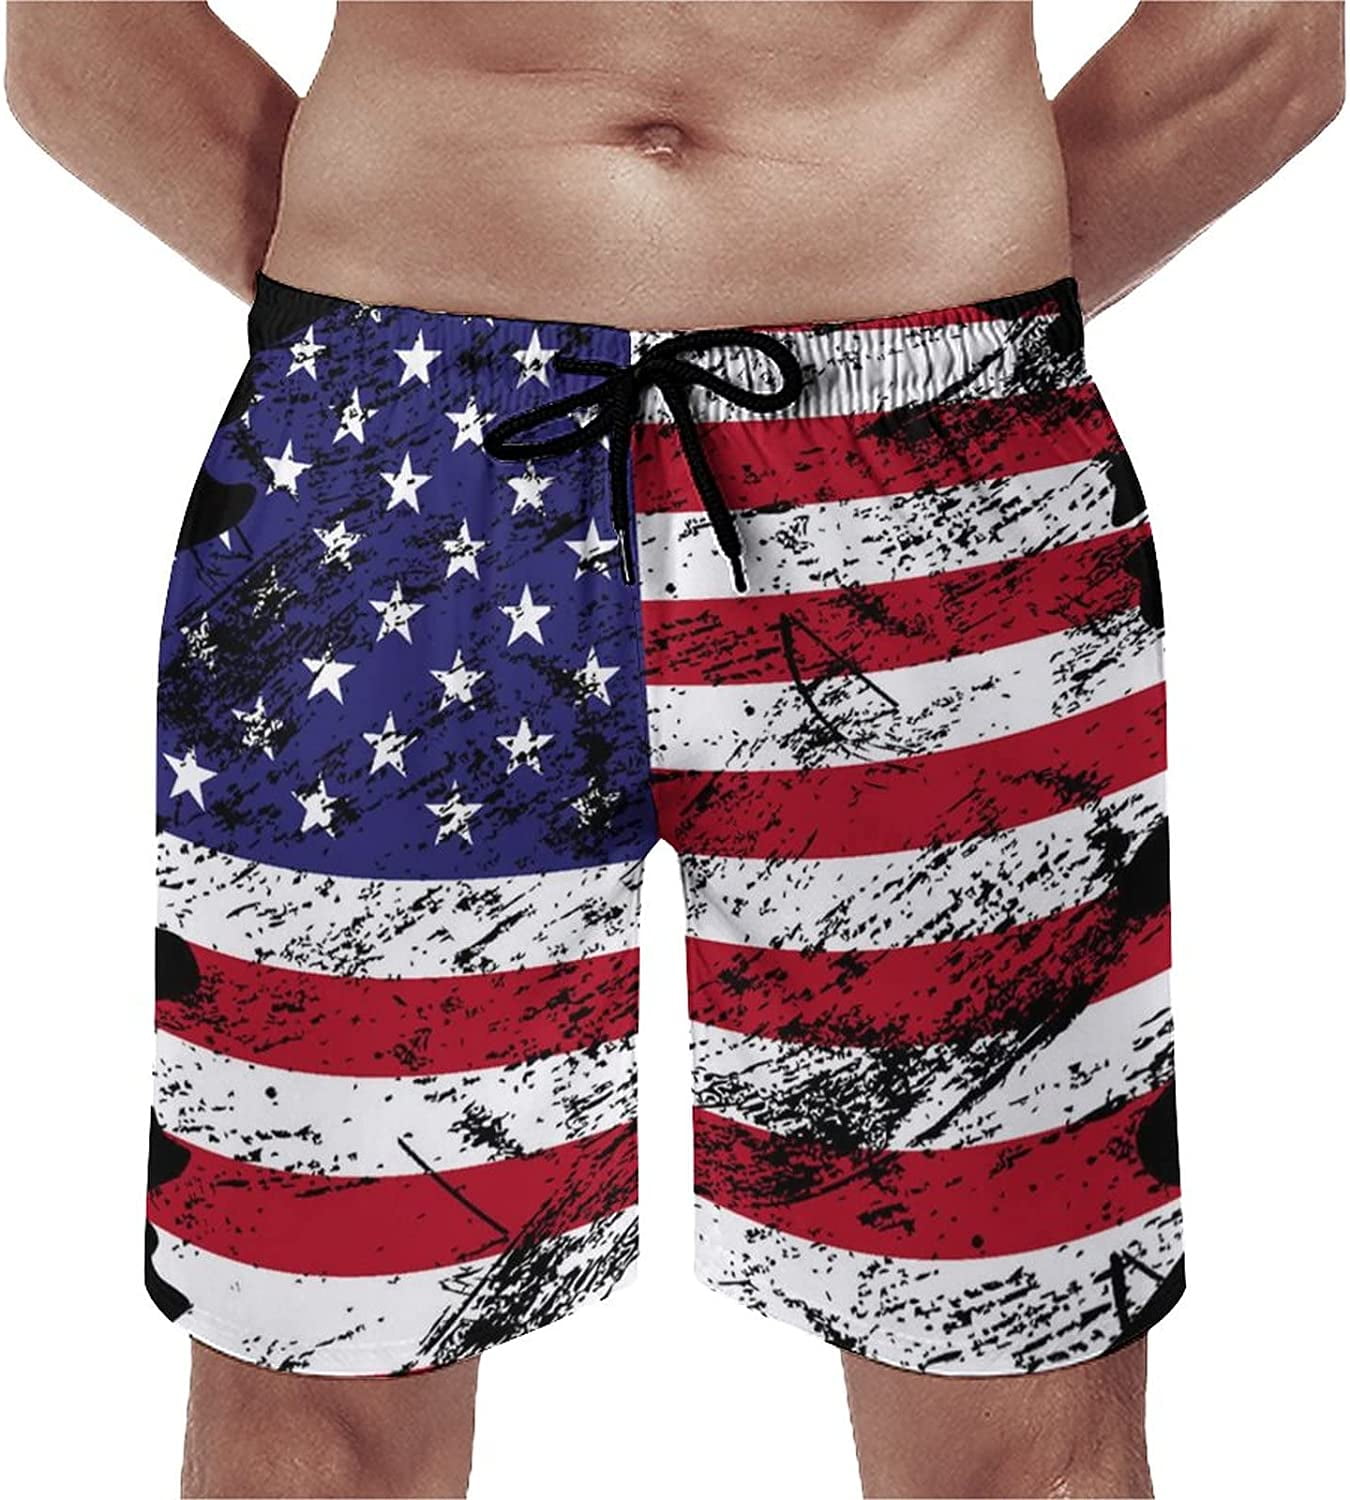 Men's Vintage-Retro-American Flag-Black Quick Dry Board Shorts with ...